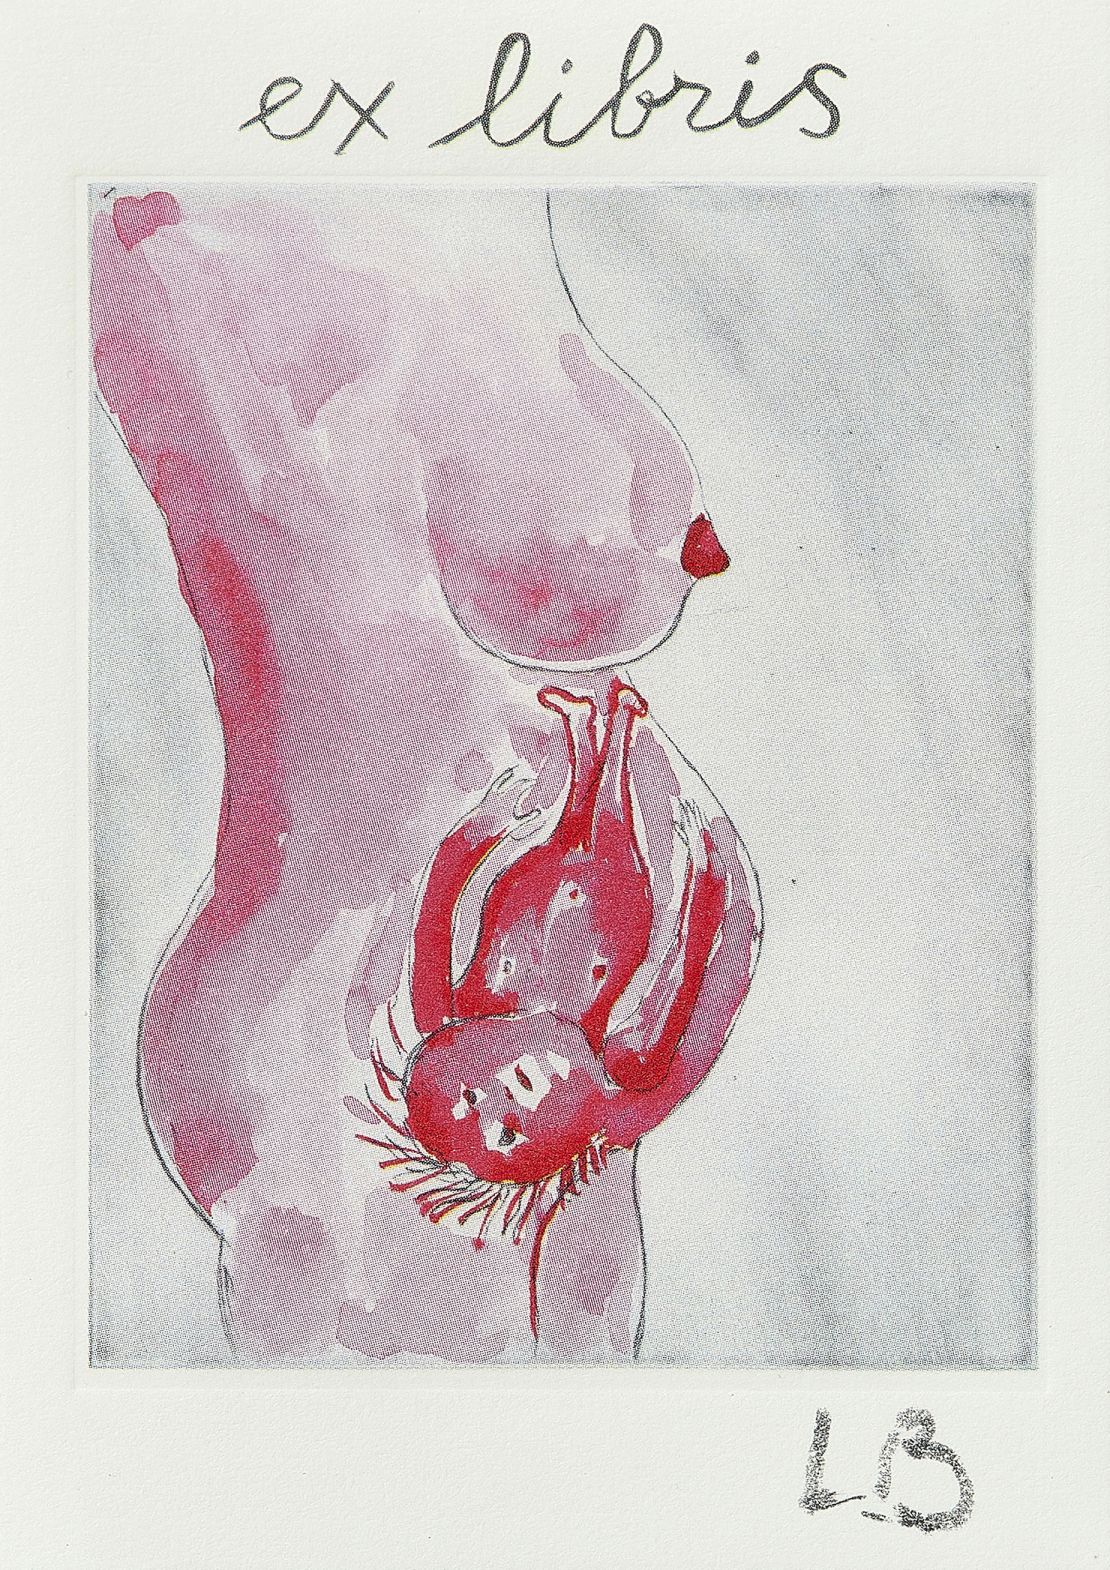 Louise Bourgeois "The-Reticent Child," 2005